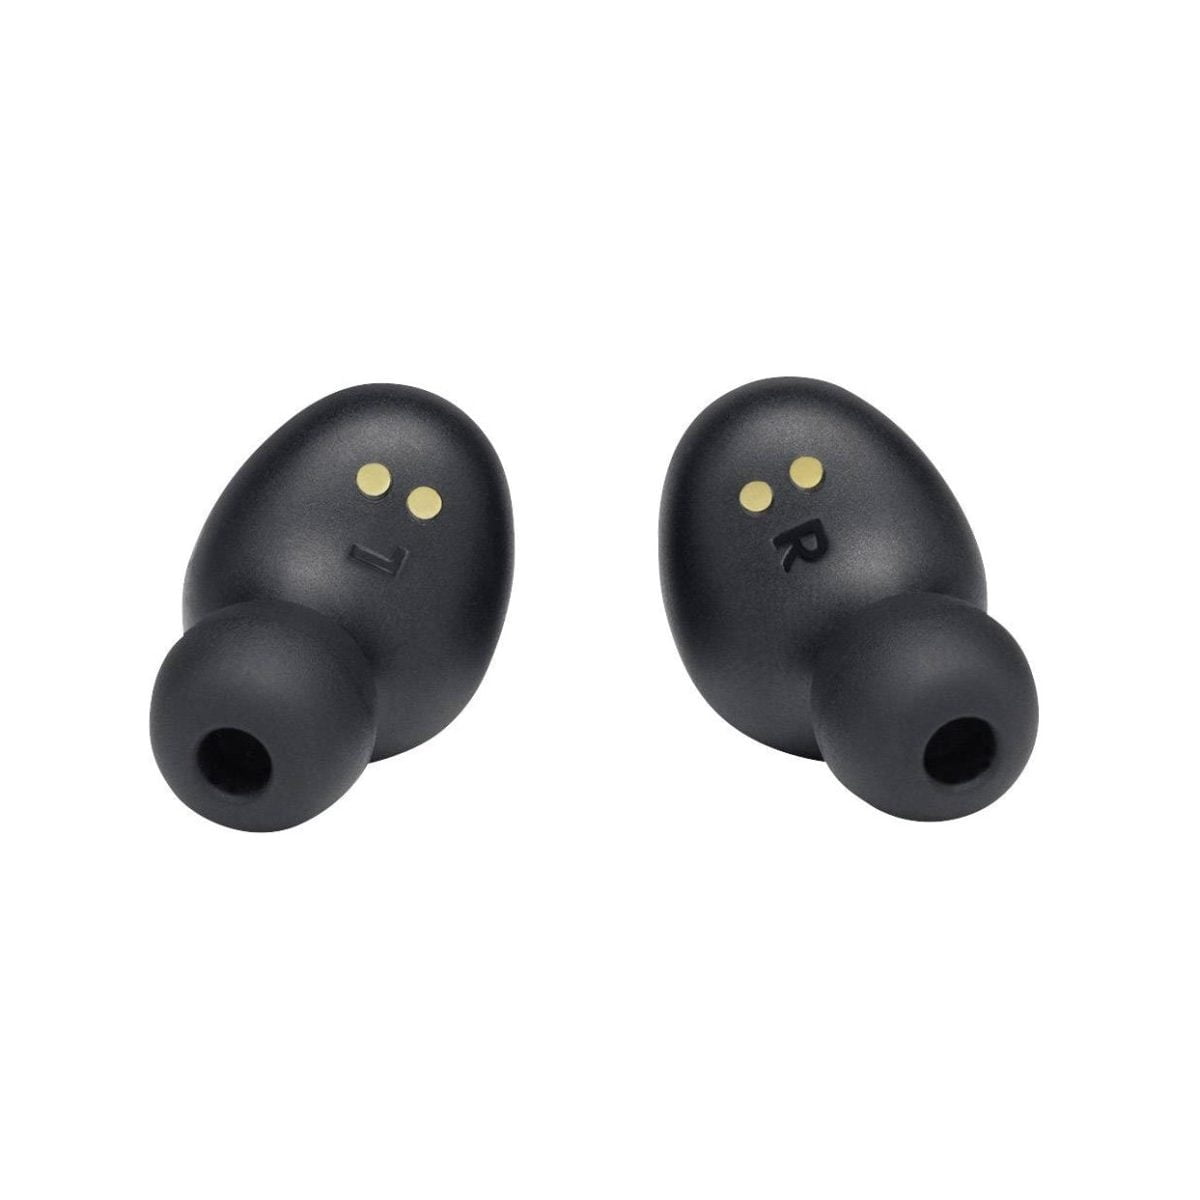 Image 1 1 Jbl &Lt;H1 Class=&Quot;Product-Title&Quot;&Gt;Jbl T115 Tws True Wireles In-Ear Bluetooth Headphones - Black&Lt;/H1&Gt; Https://Www.youtube.com/Watch?V=B9Dqwiy_Nvg Feel The Bassjbl Has Been Delivering Sound At Festivals And Concerts For Decades. Jbl Will Immerse You In Your Own World With This Incredible Pure Bass Sound.longer Listening Pleasurewith Up To 21 Hours Of Battery Life (6 Hours From The Earphone) Jbl Earphones Jbl T115 Tws True Wireles In-Ear Bluetooth Headphones - Black